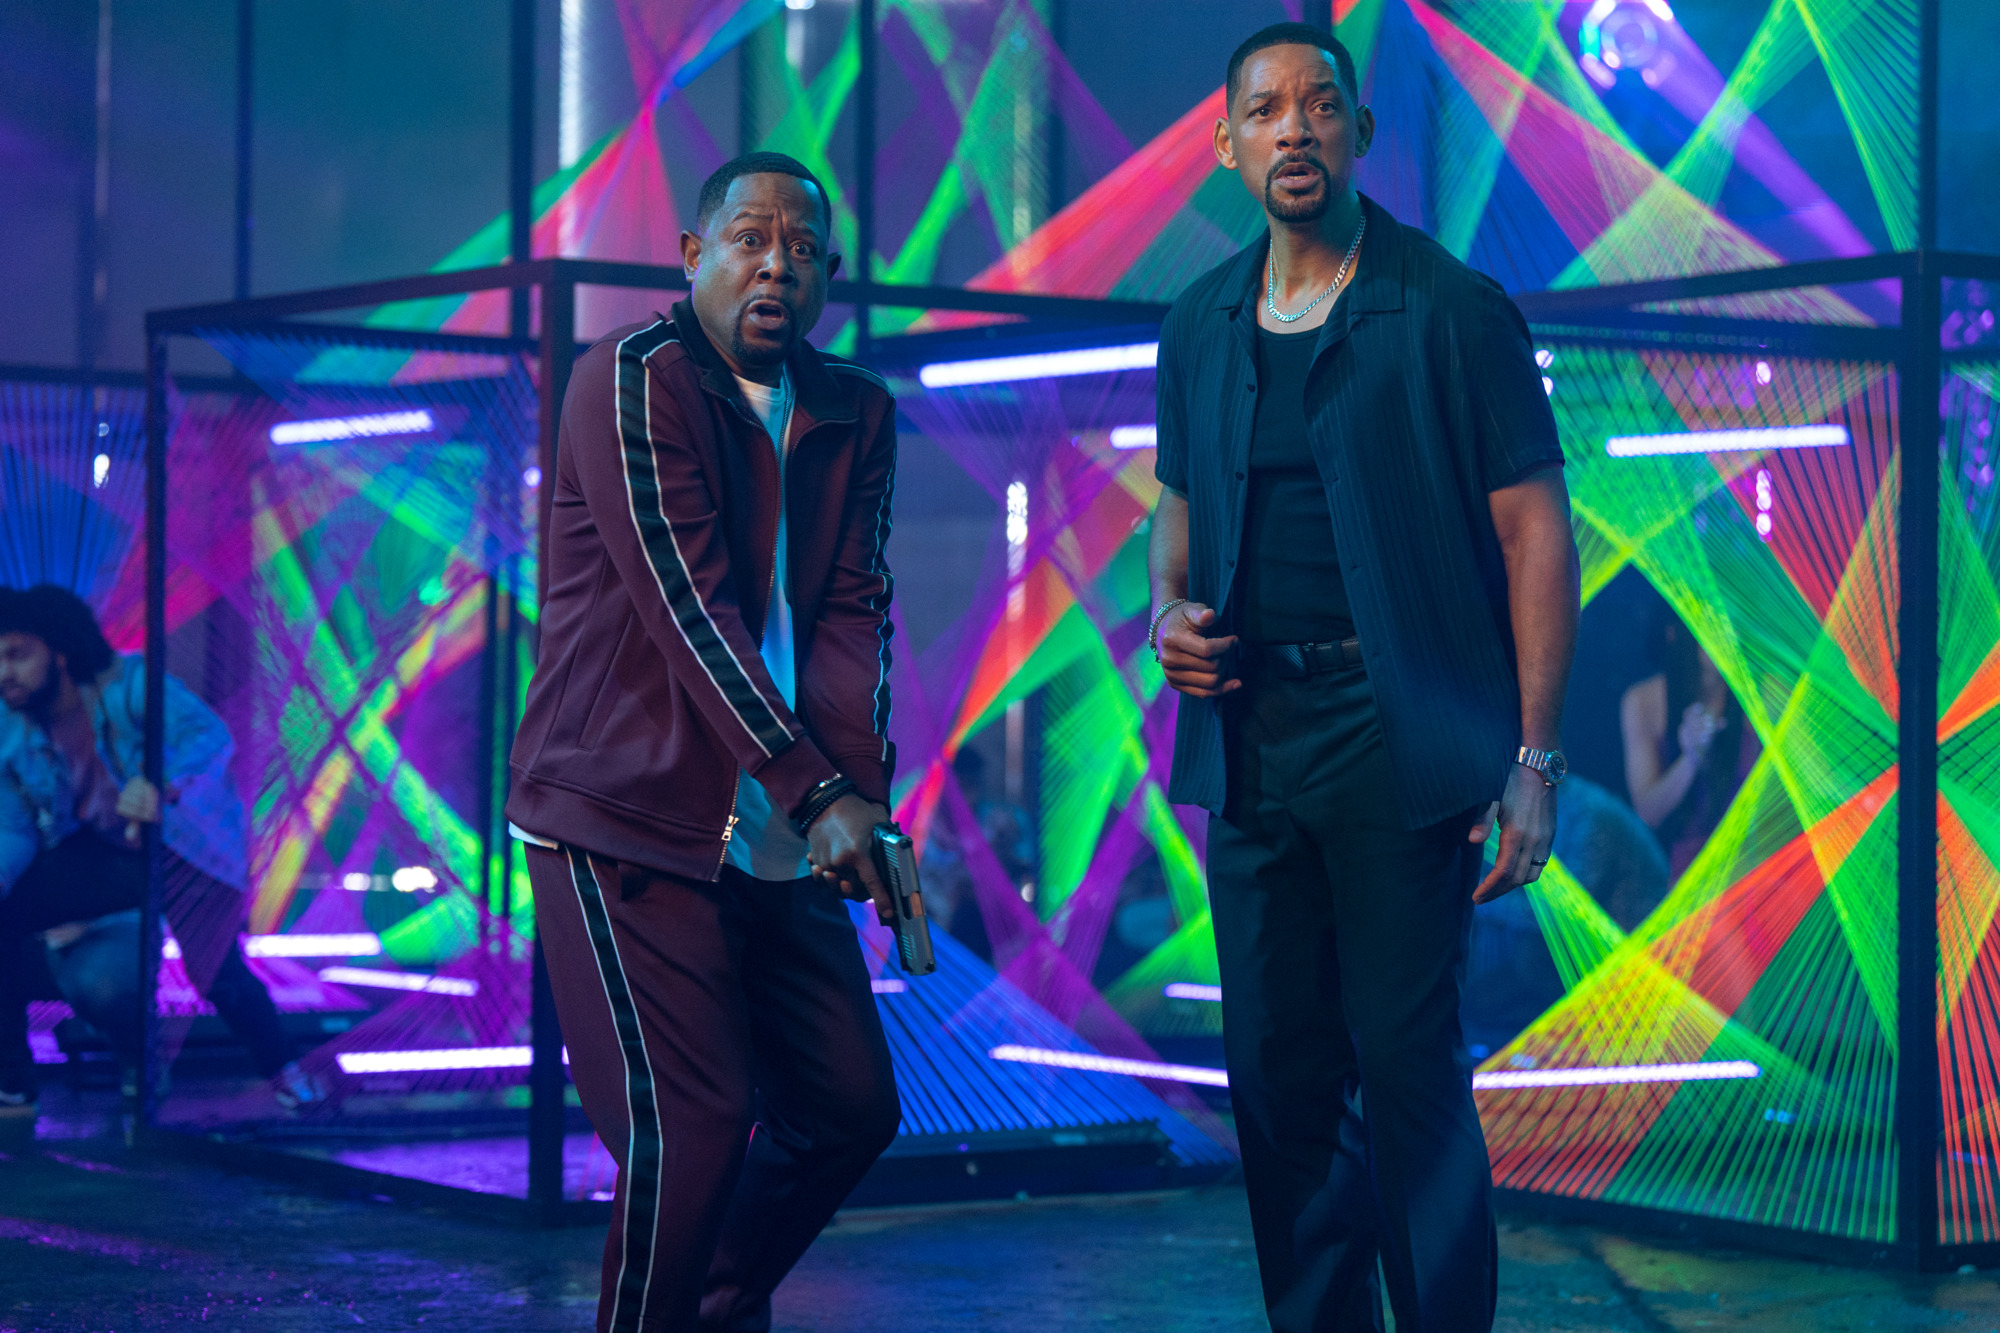 Bad Boys : Ride or Die - Will Smith und Martin Lawrence sind zurück (C)© 2023 CTMG, Inc. All Rights Reserved. / Sony Pictures Entertainment Inc. / Frank Masi